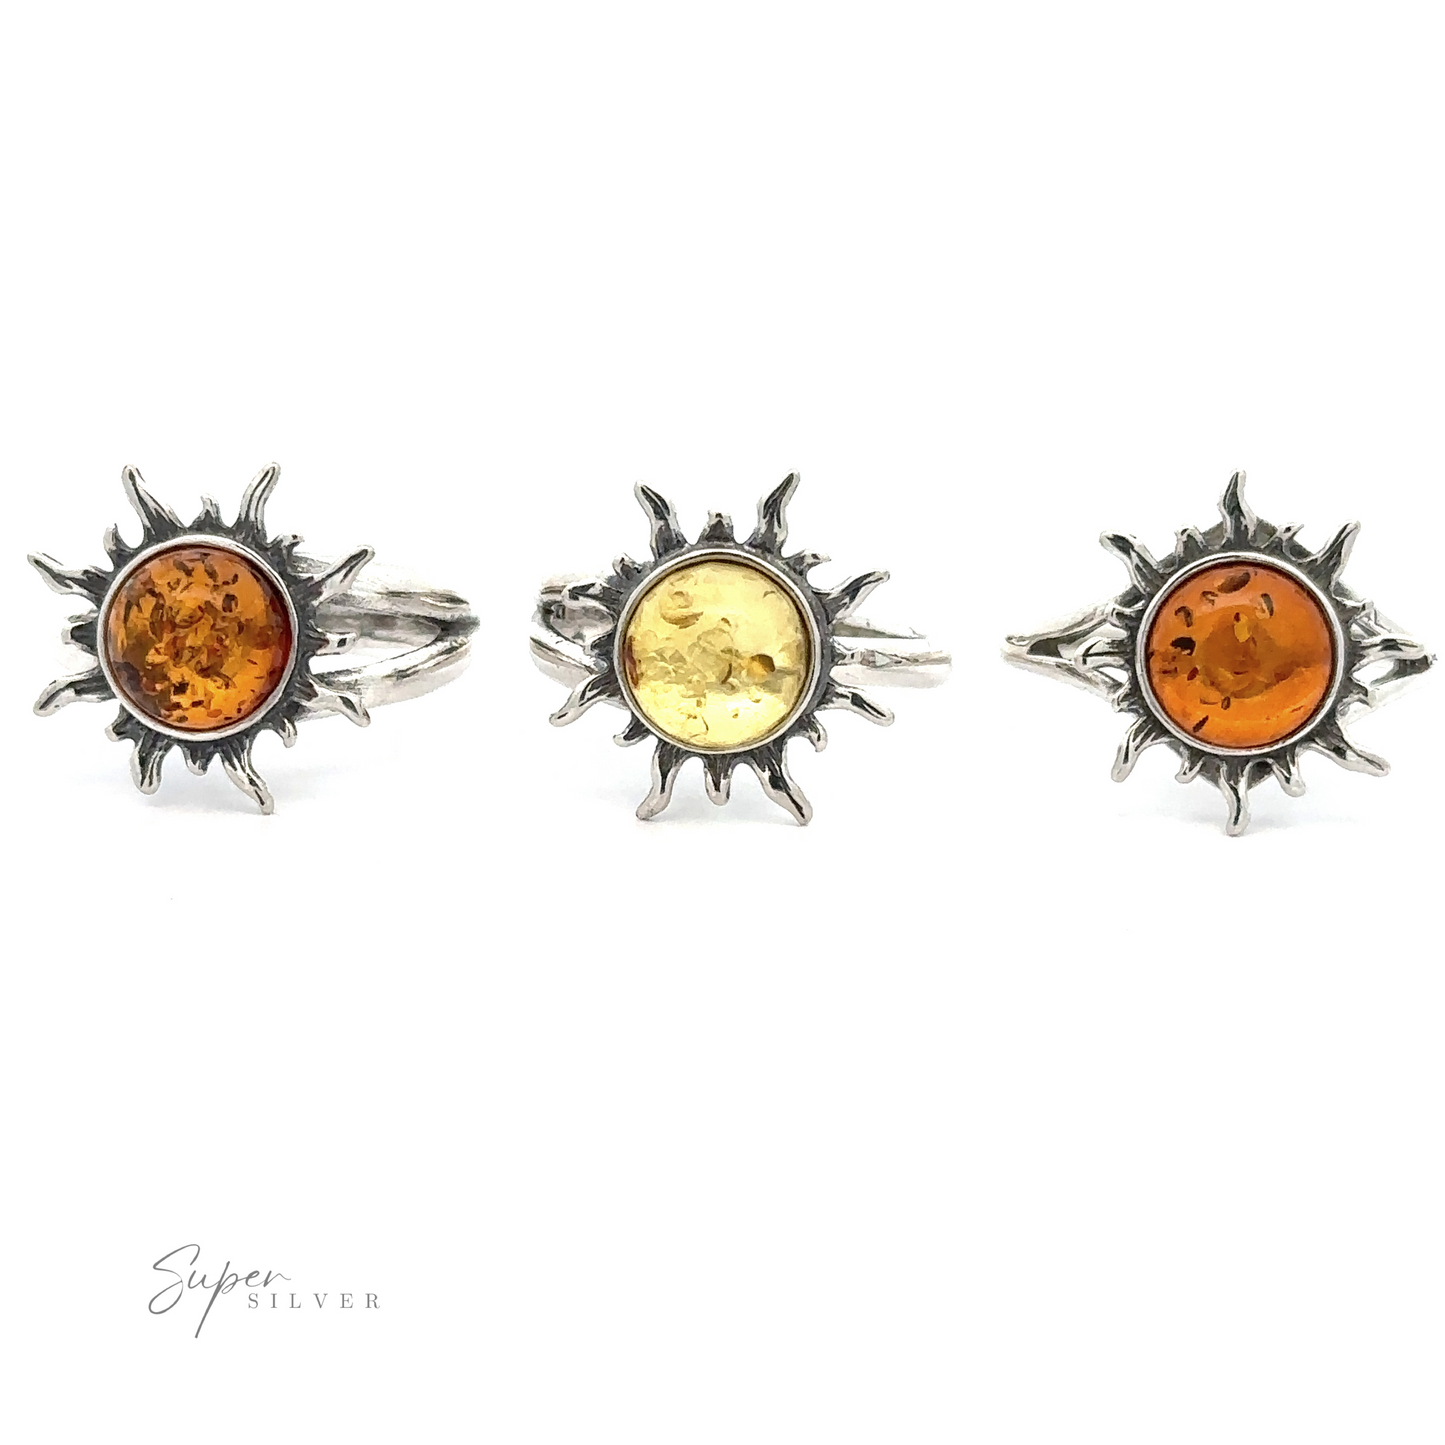 Three Glowing Amber Sun Rings with Baltic amber centers in various shades displayed against a white background.